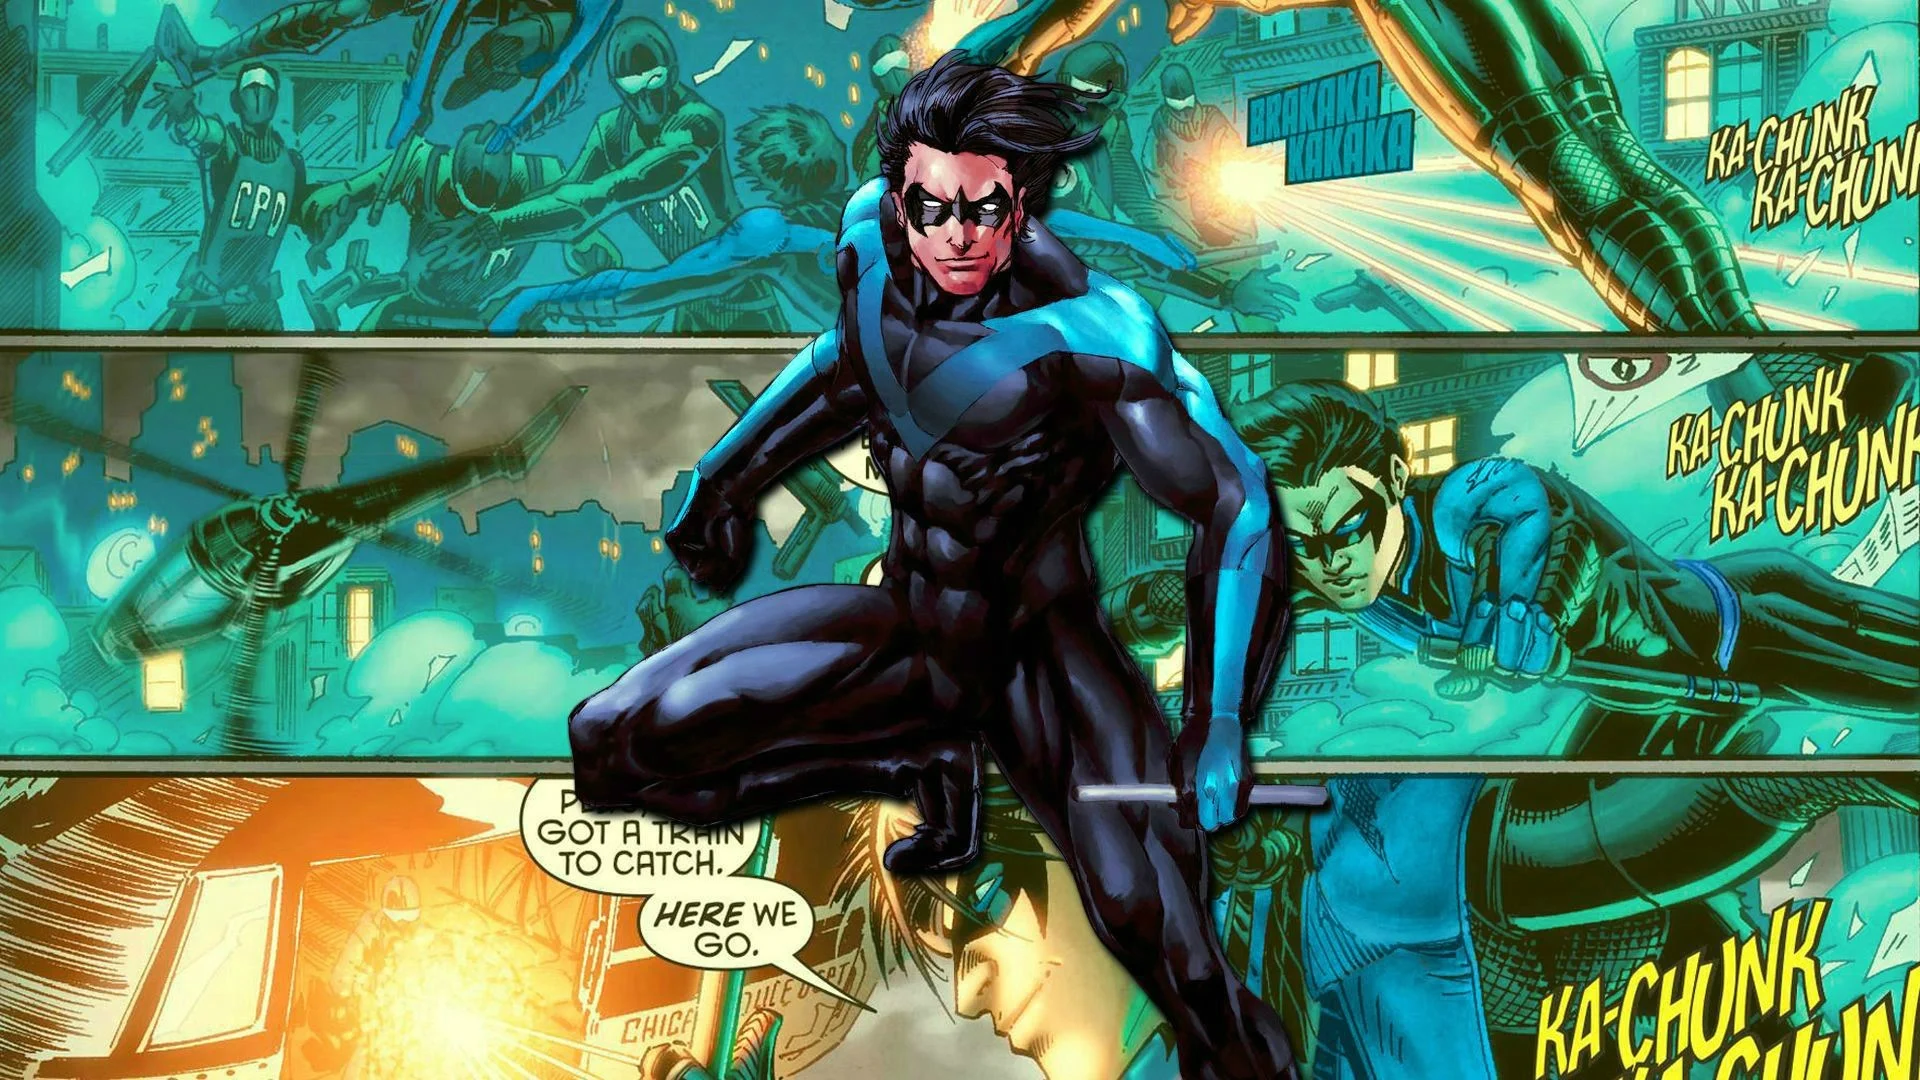 Nightwing HD Wallpapers Backgrounds Wallpaper Page | HD Wallpapers |  Pinterest | Nightwing, Hd wallpaper and Wallpaper